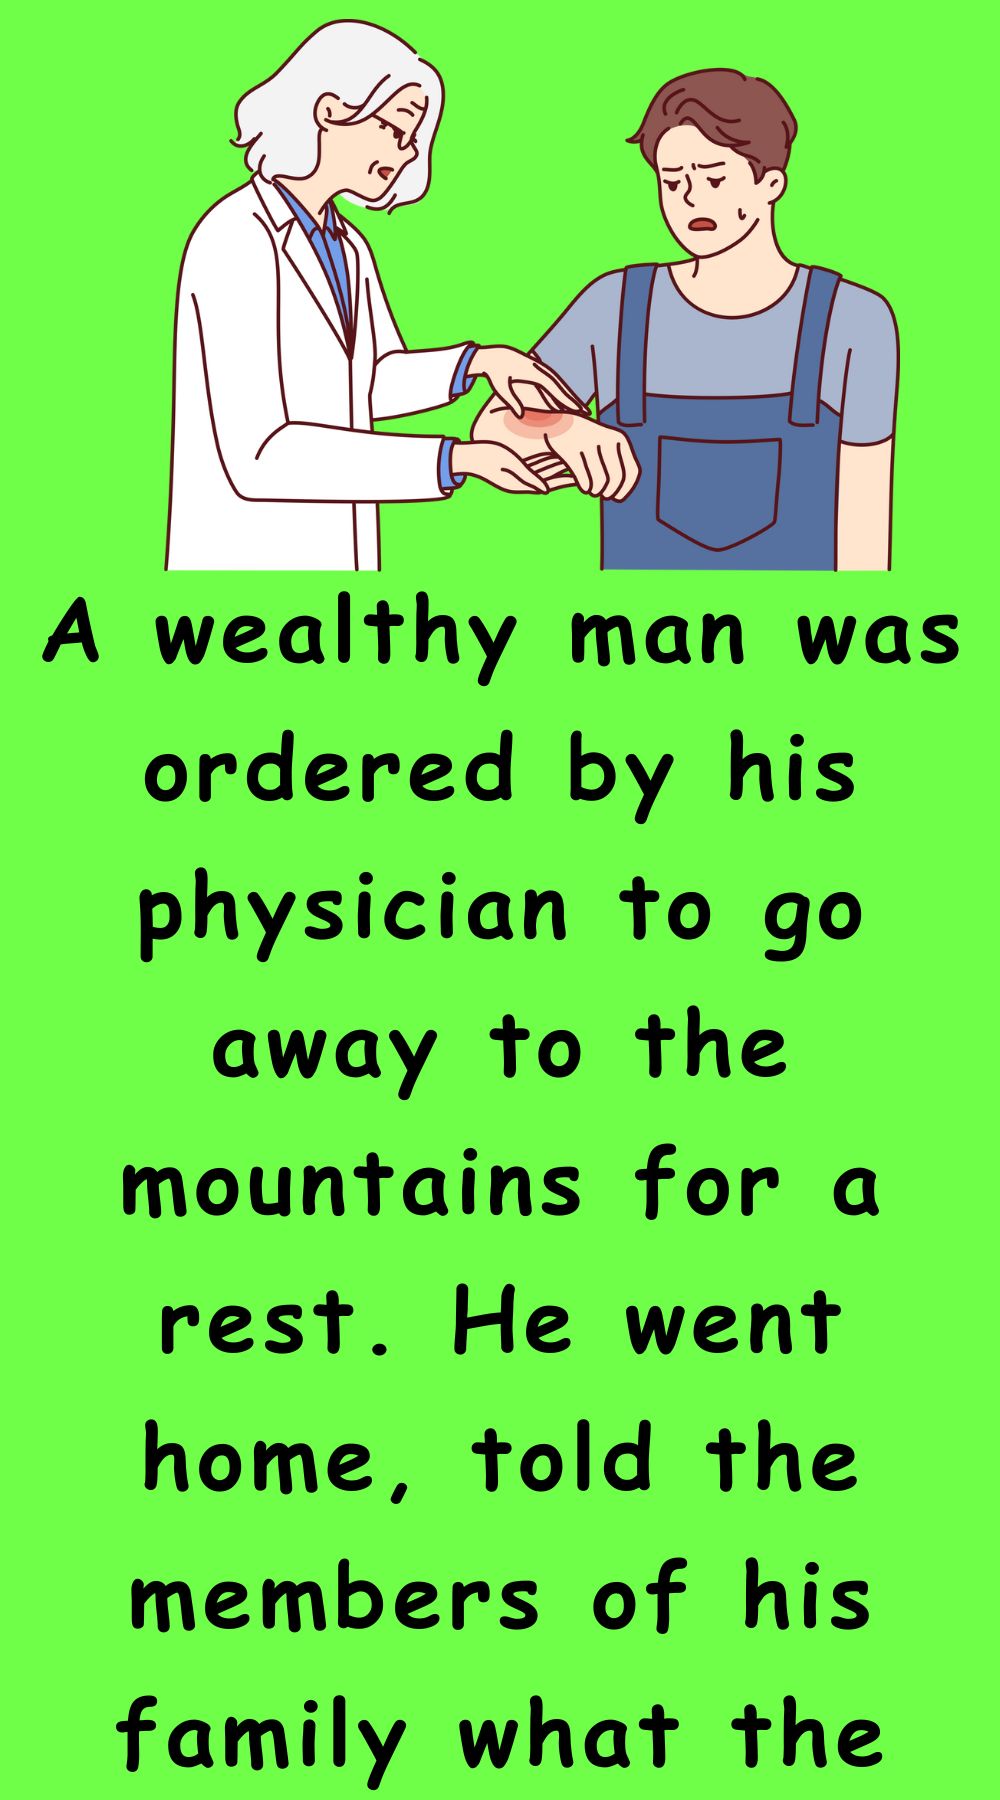 A wealthy man was ordered by his physician